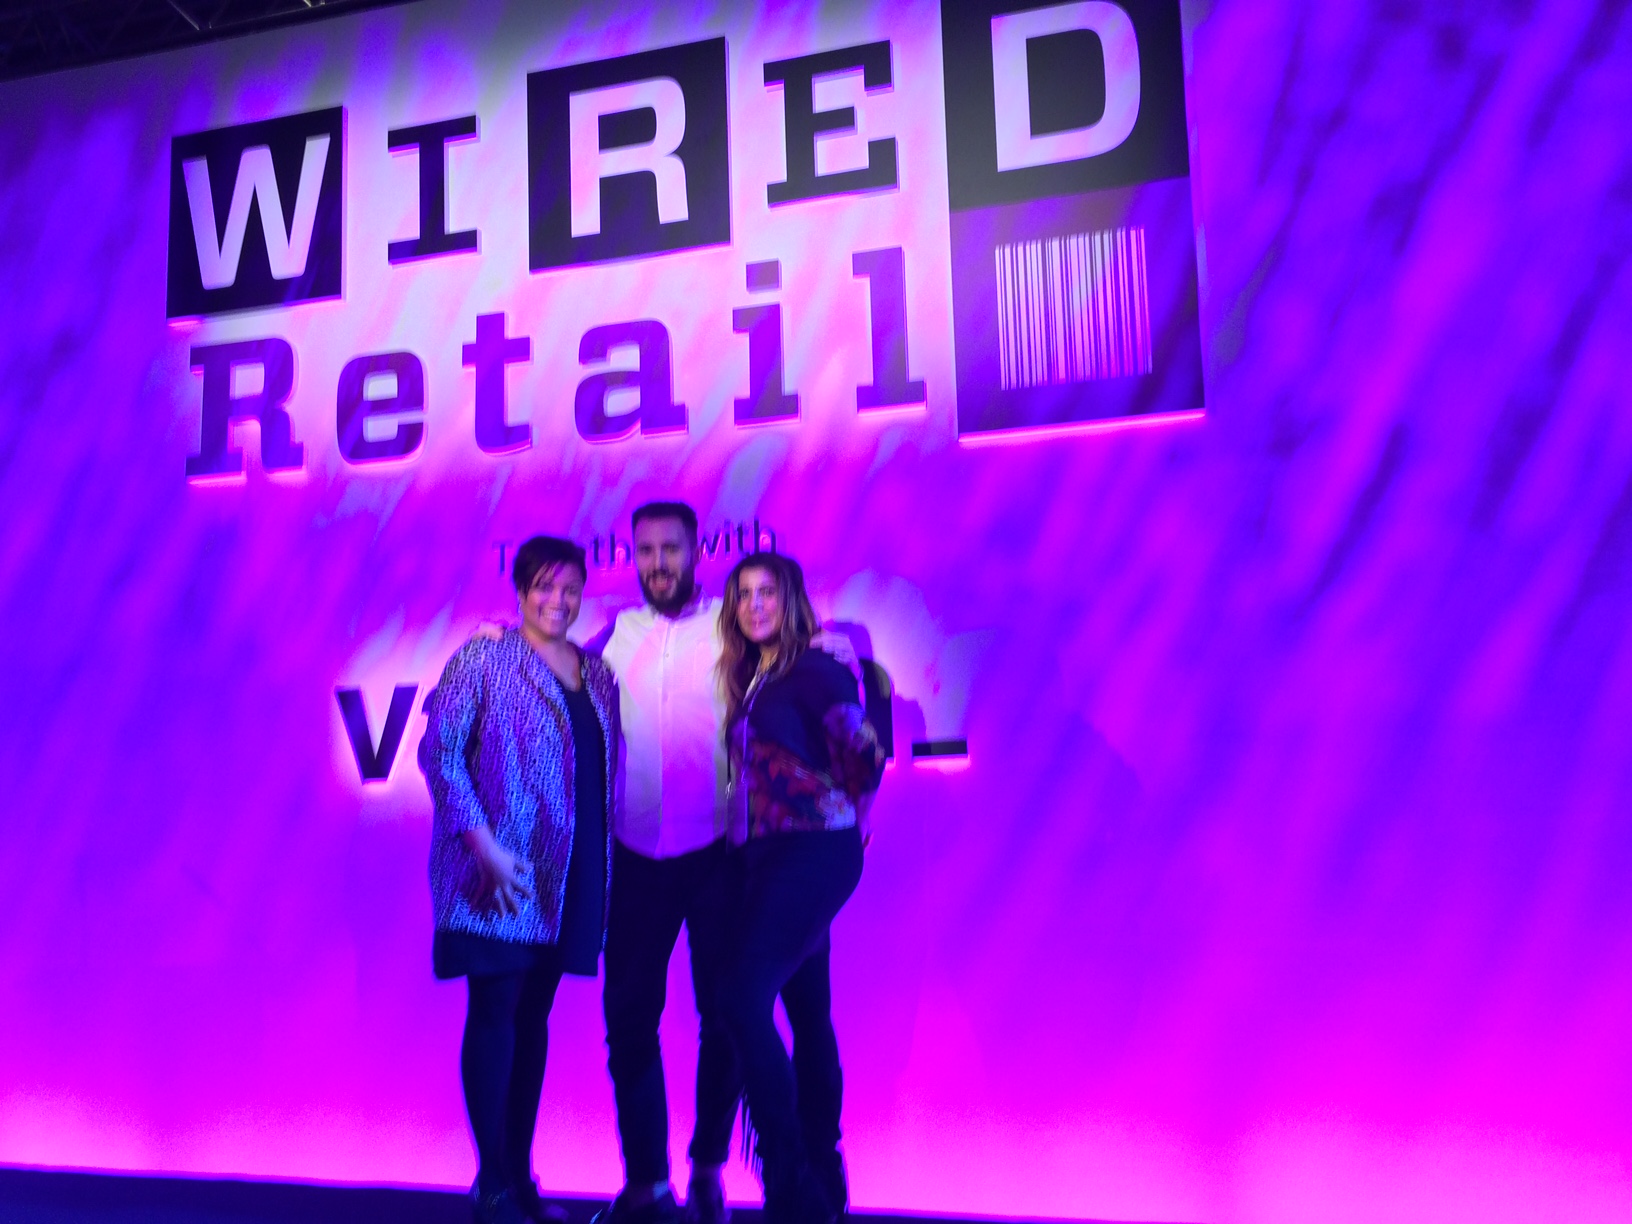 Wired Retail